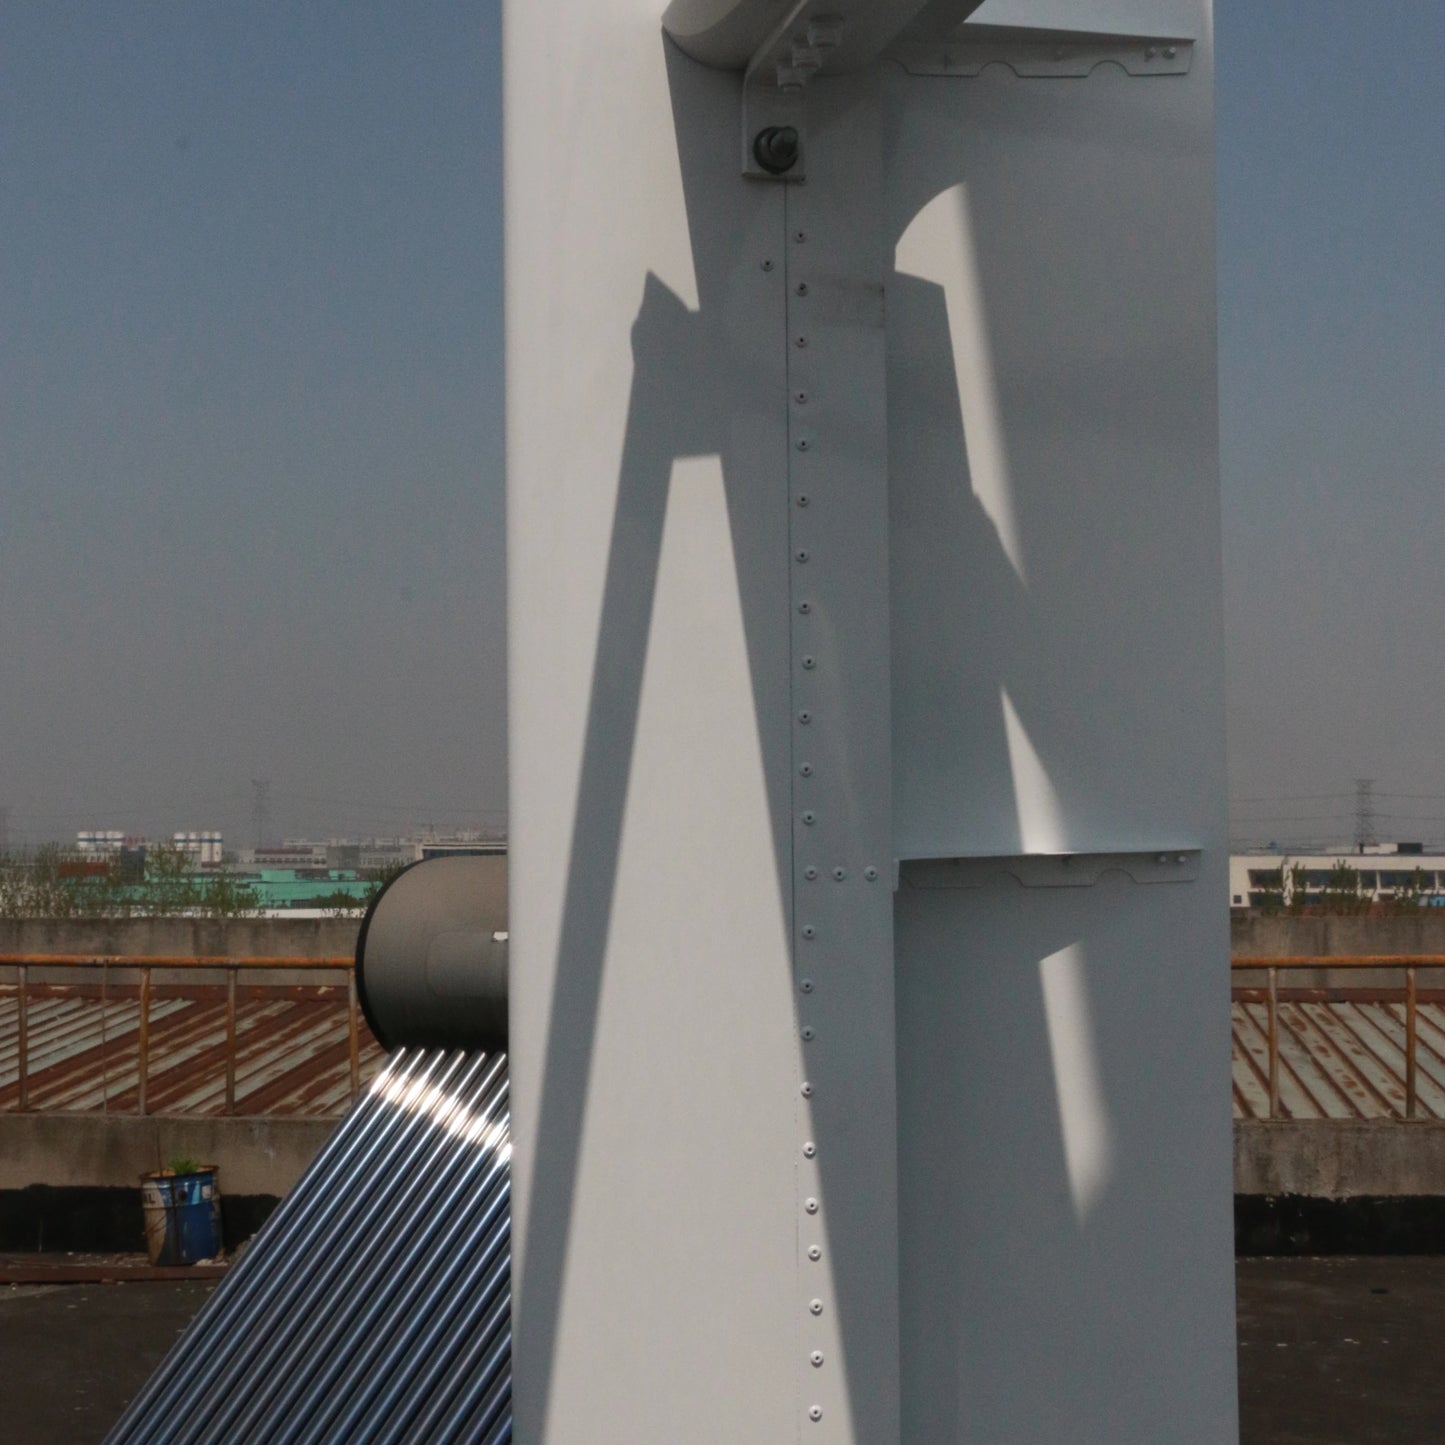 CE Certificated 5KW 96V 120V 220V Vertical Wind Turbine Generator Low Speed Could Do Hybrid System With Solar Panel